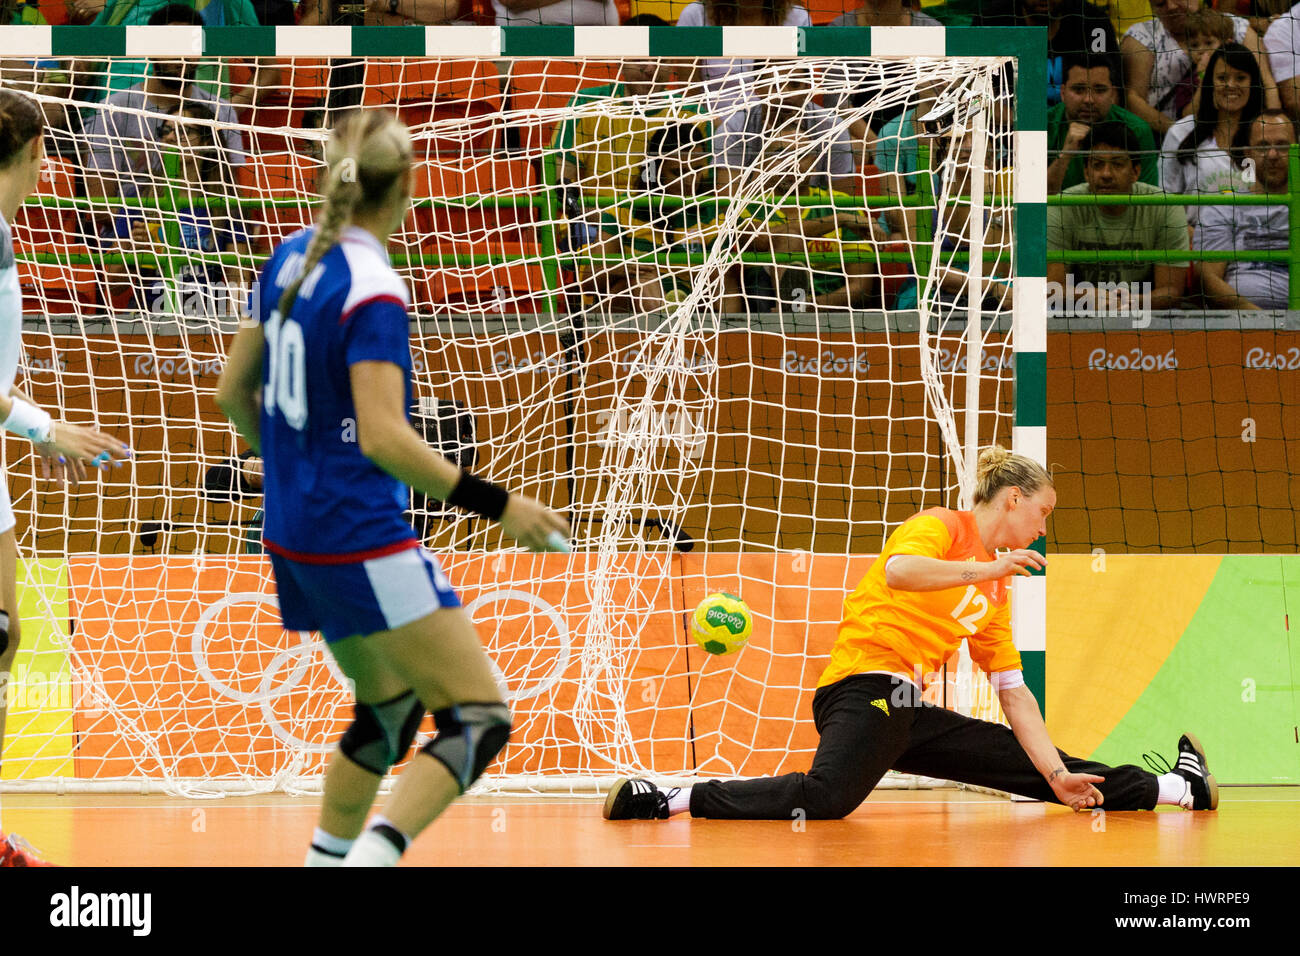 Rio de Janeiro, Brazil. 20 August 2016 Amandine Leynaud (FRA) goalie competes in the women's handball gold medal match Russia vs. France at the 2016 O Stock Photo